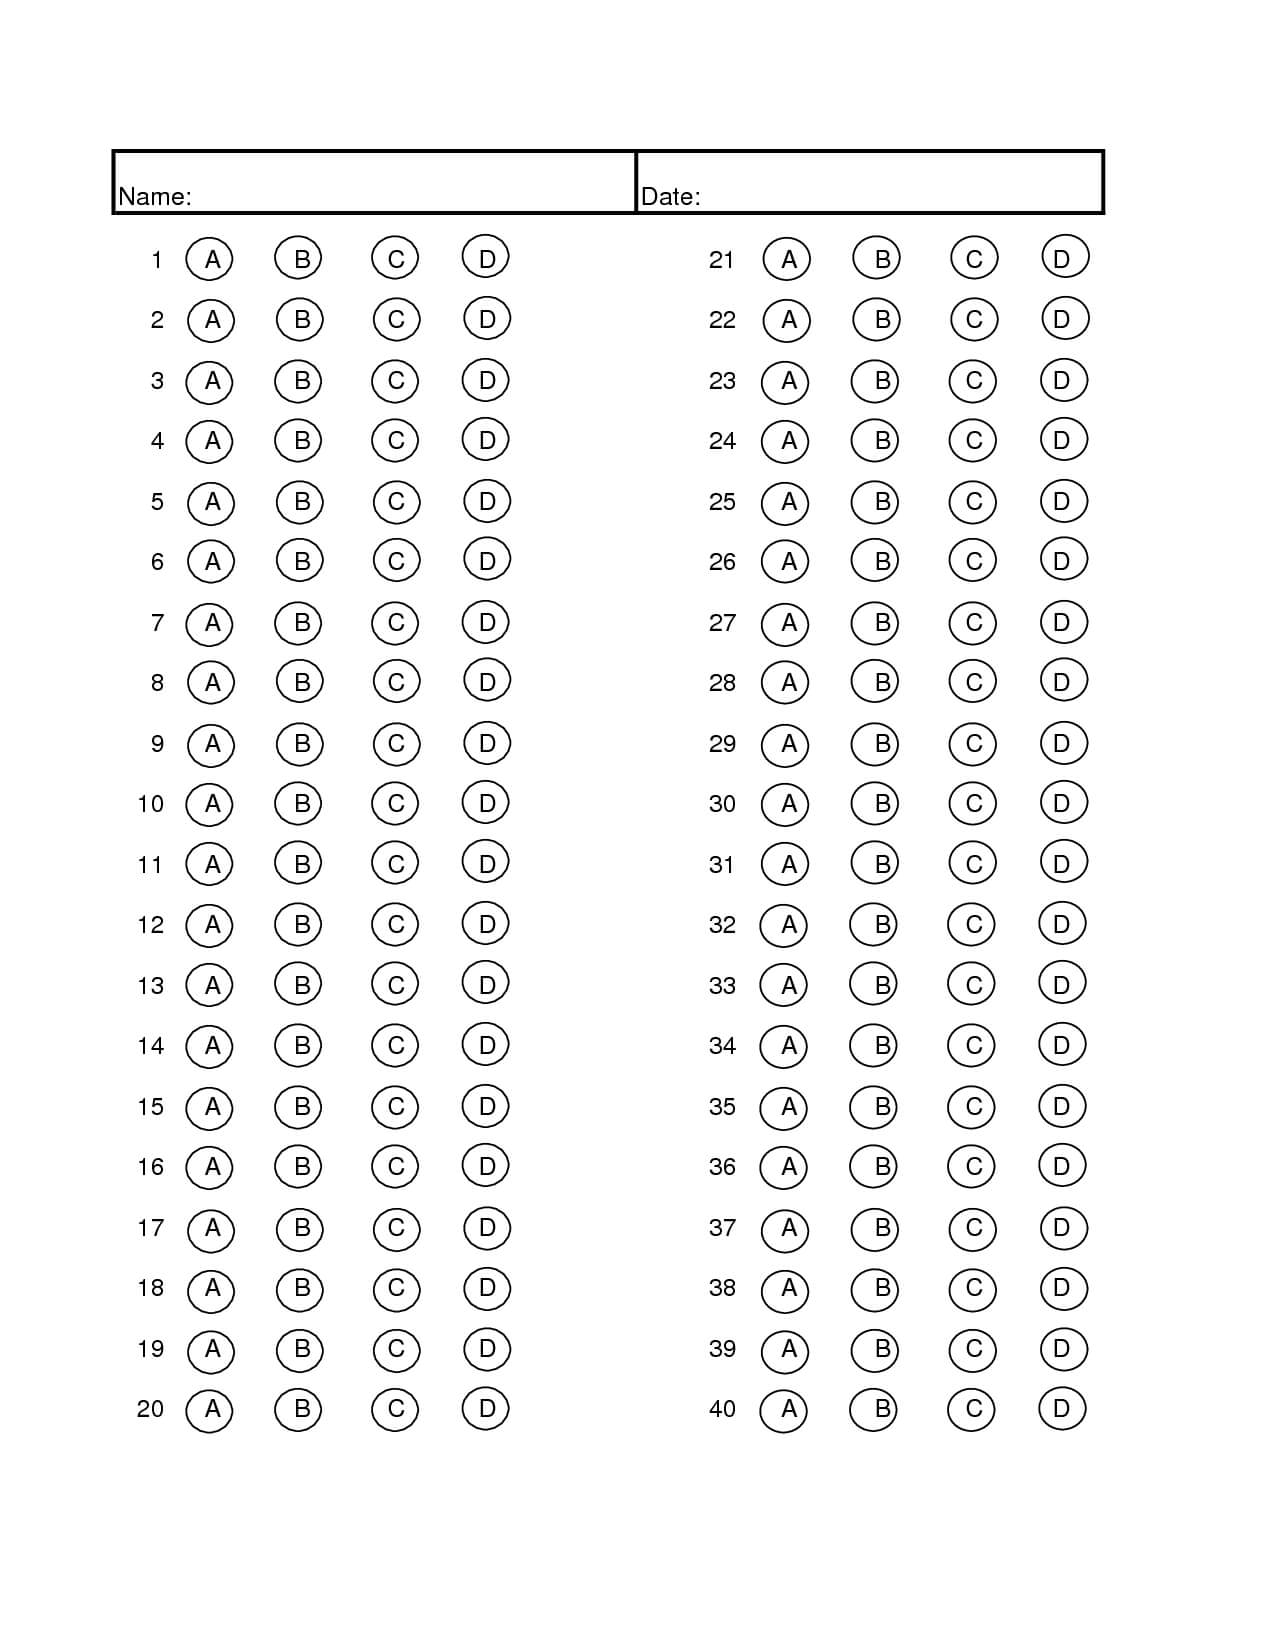 Bubble Answer Sheet Question Template D Microsoft Word With Blank Answer Sheet Template 1 100